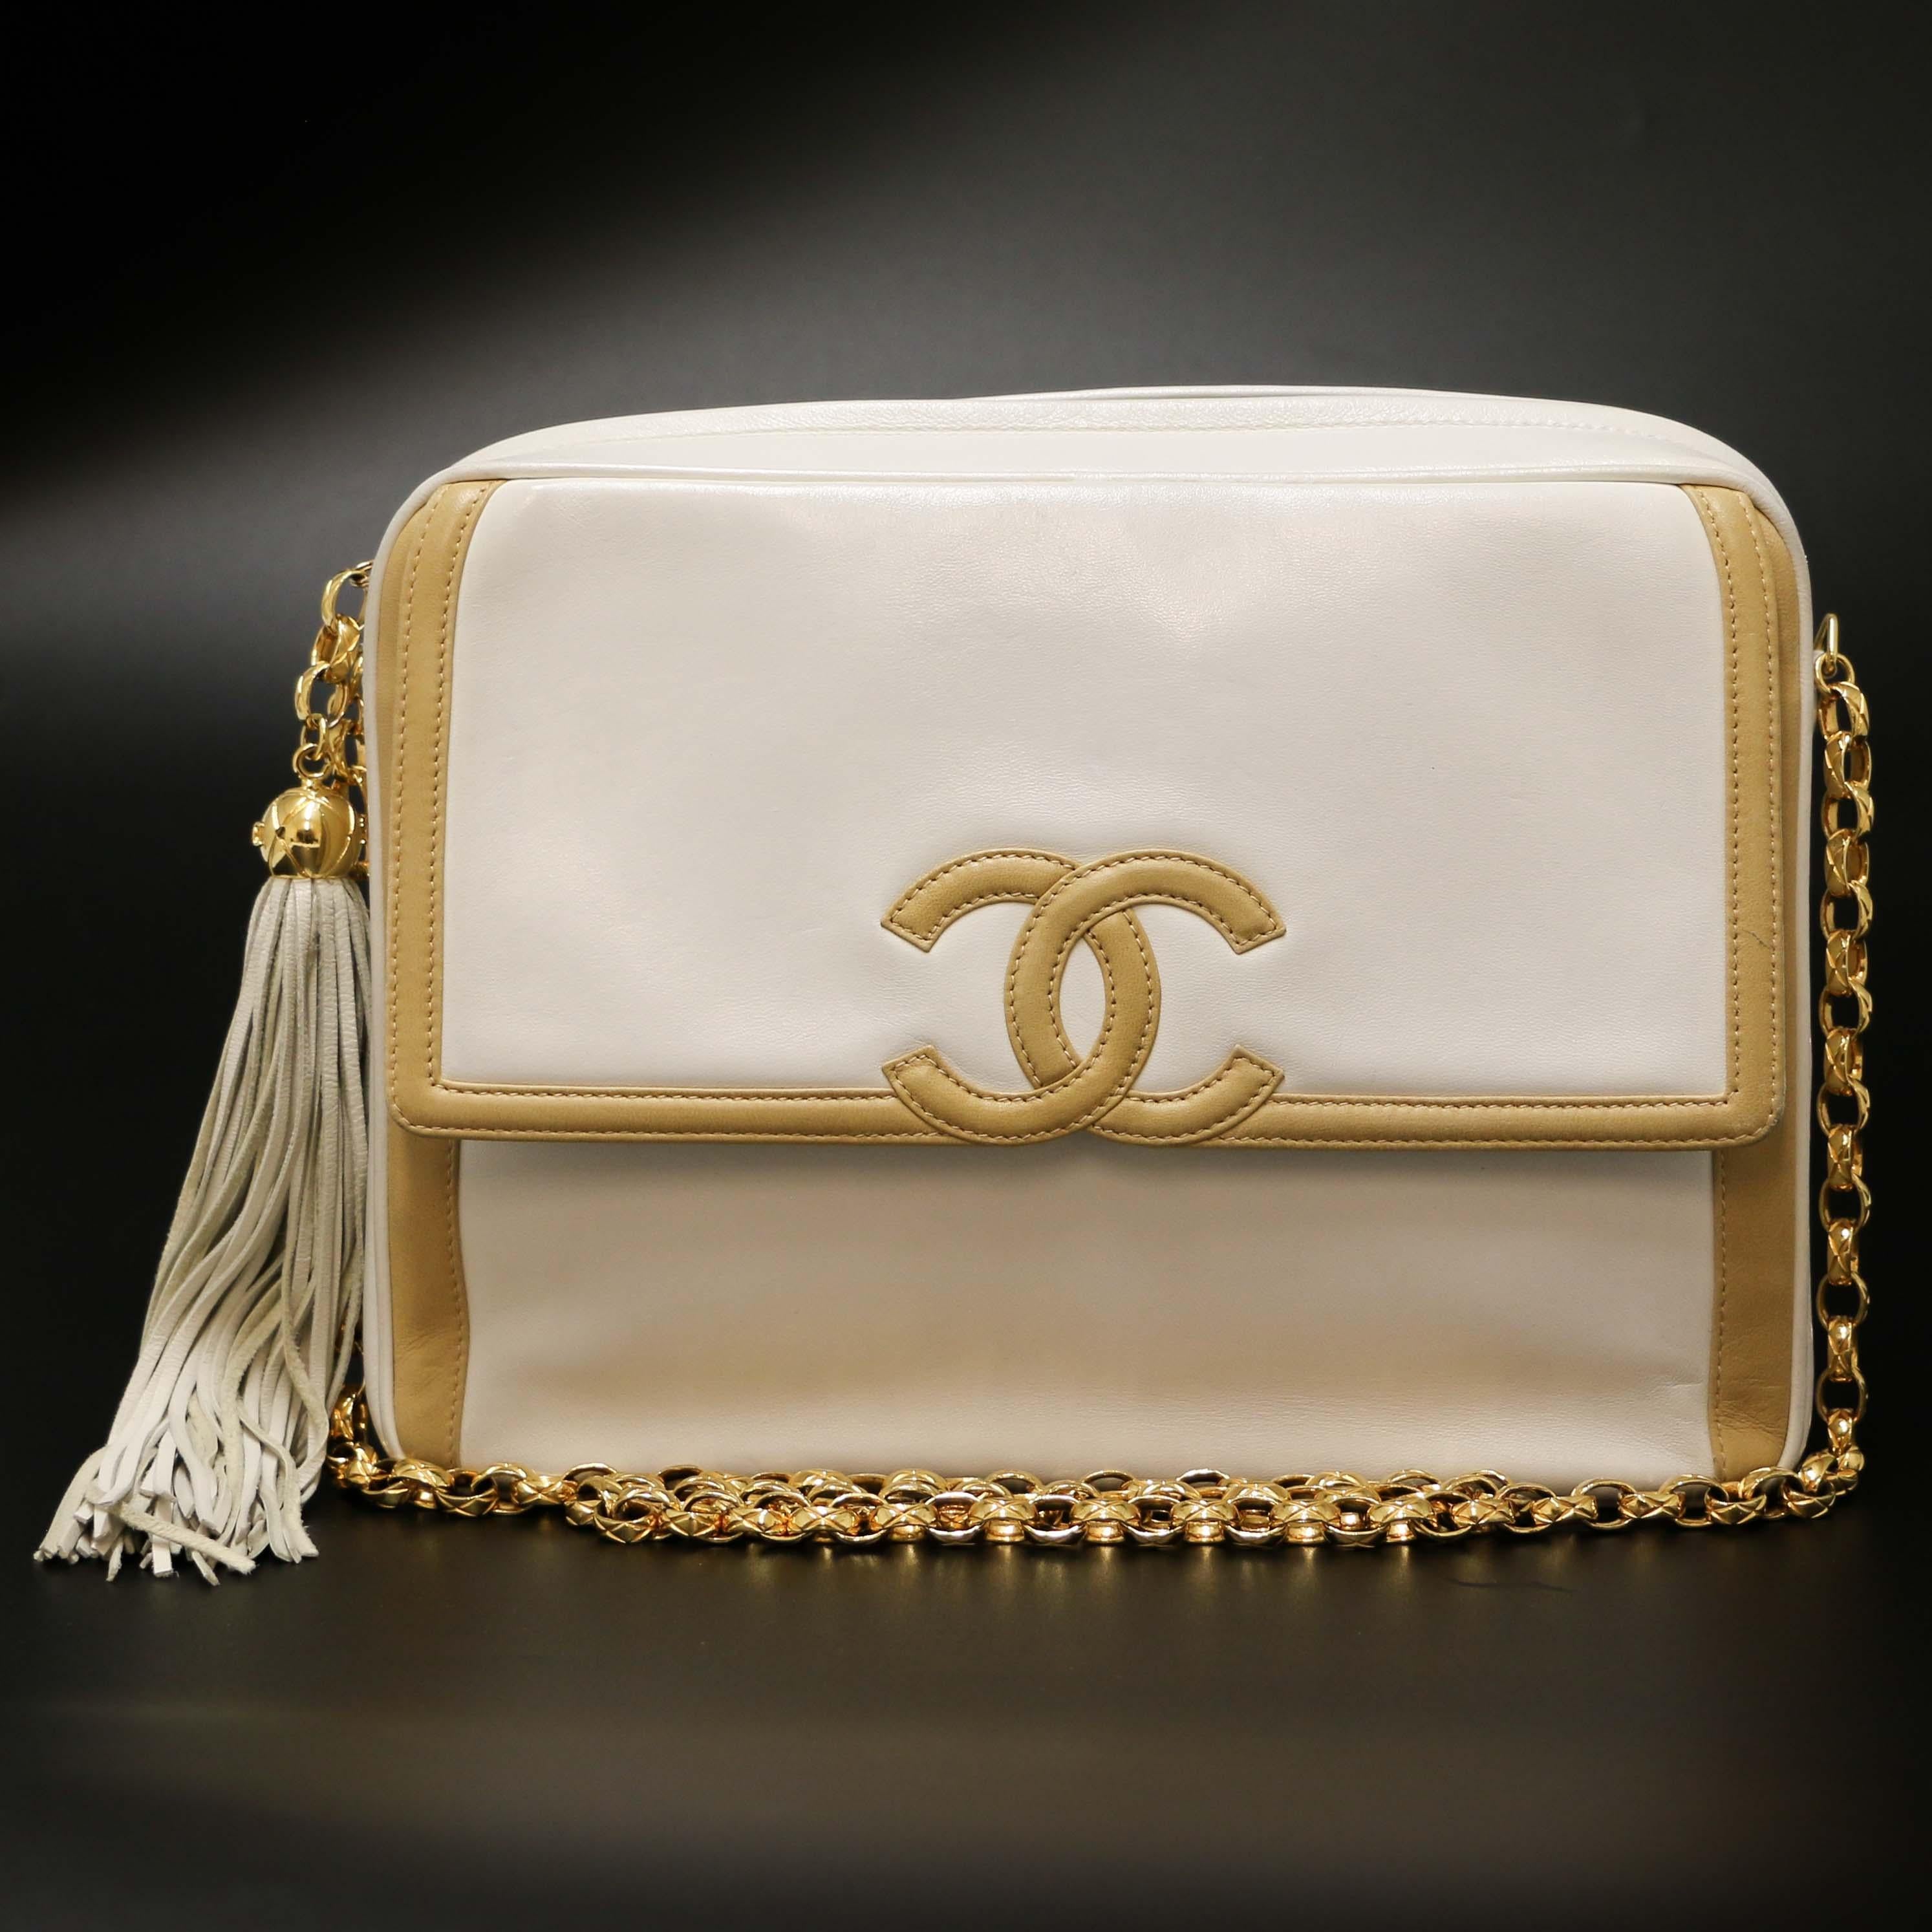 Beautiful Vintage bicolor Caméra bag from Chanel.

Condition: very good
Made in Italy
Collection: Caméra large model
Genre: women
Material: soft leather
Interior: white leather
Colors: white and beige
Dimensions: 27 x 20 x 8 cm
Strap: 110cm
Hologram